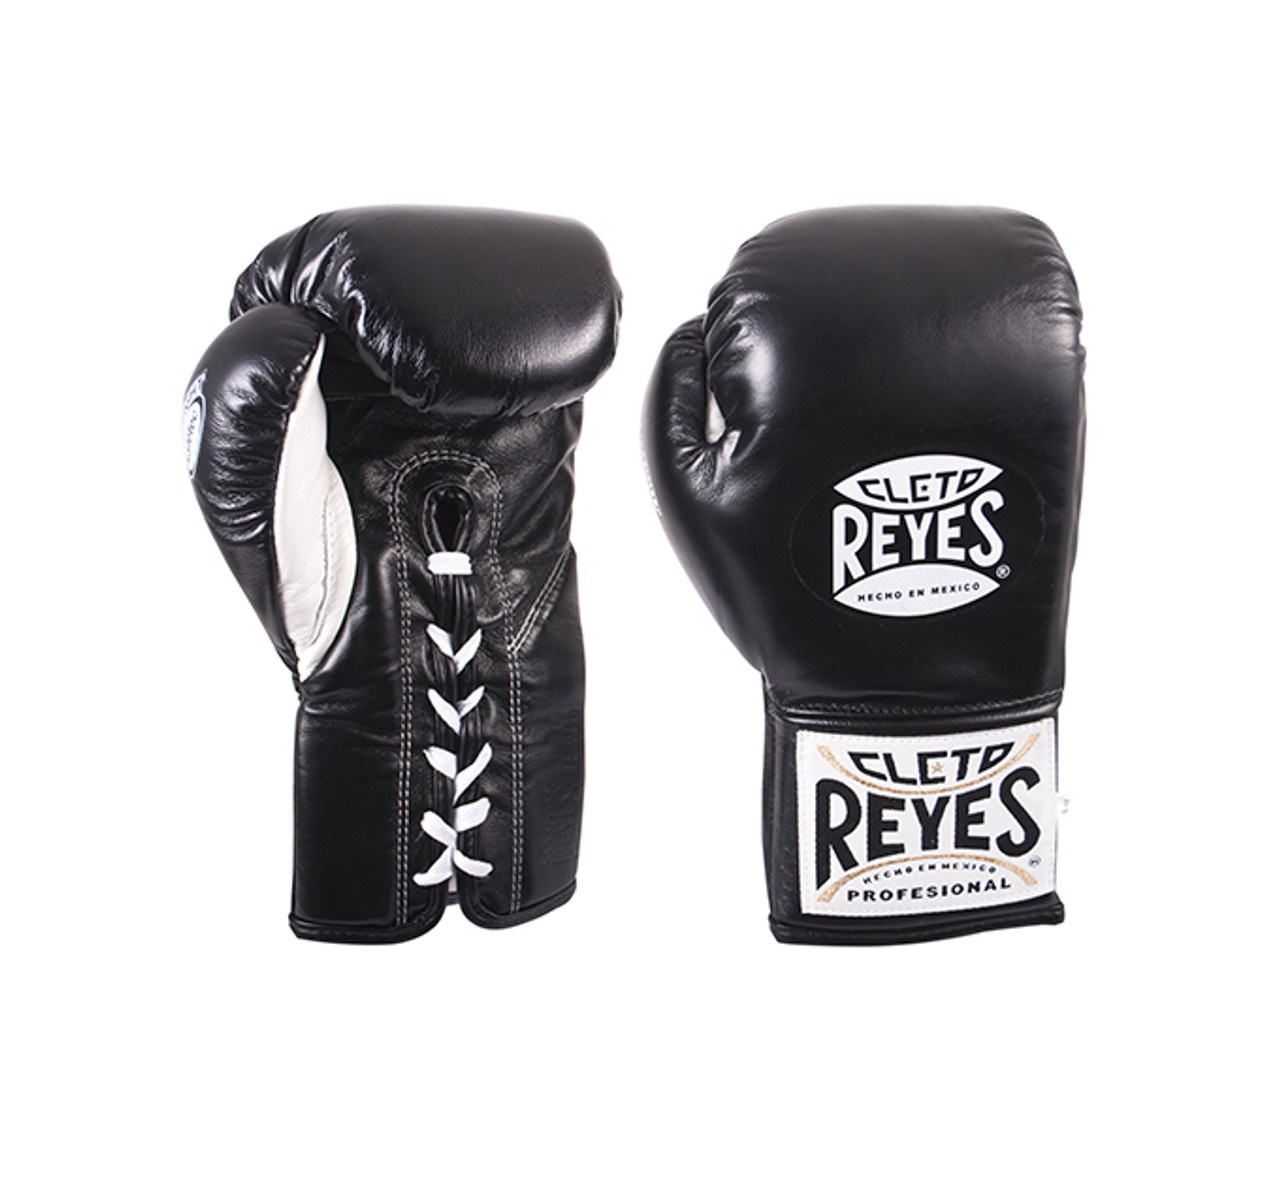 Safetec Pro Boxing Fight Gloves - Boxing Gear - Cleto Reyes